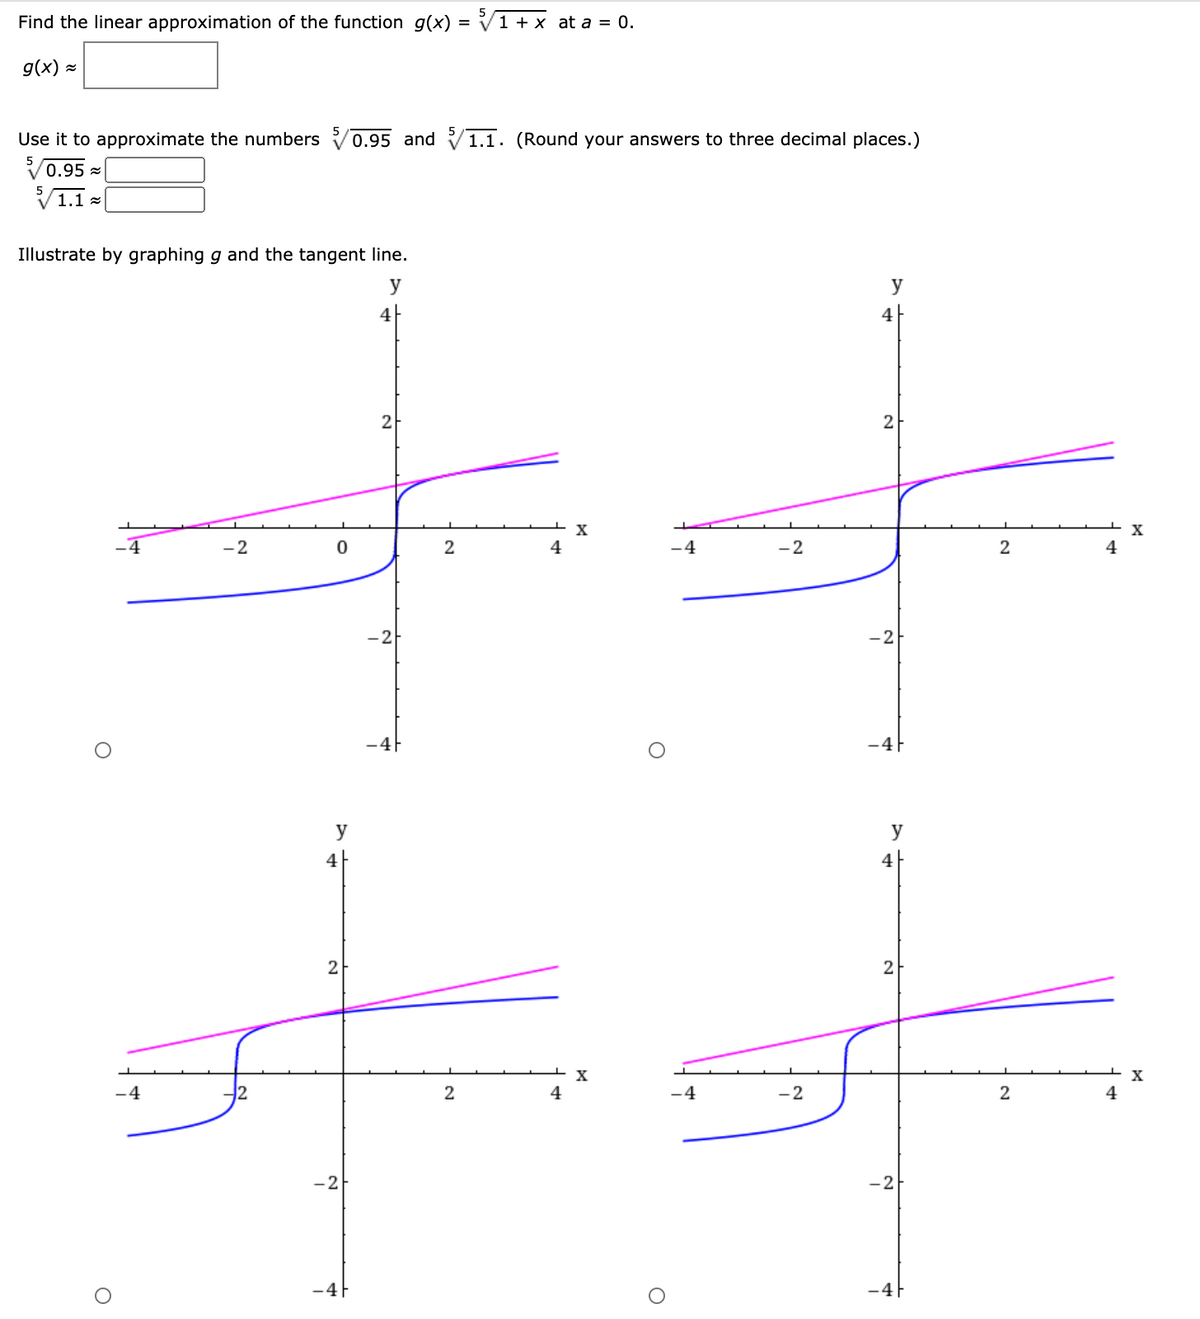 Find the linear approximation of the function g(x) = V1 + x at a = 0.
g(x) -
Use it to approximate the numbers V0.95 and V1.1. (Round your answers to three decimal places.)
0.95 =
1.1 =
Illustrate by graphing g and the tangent line.
y
y
2
2
X
-4
-2
2
4
-4
-2
4
-2
-4F
-4F
y
y
4
4|
2
2
X
X
2
2
-4
-2
-2
-2
-4F
2.
